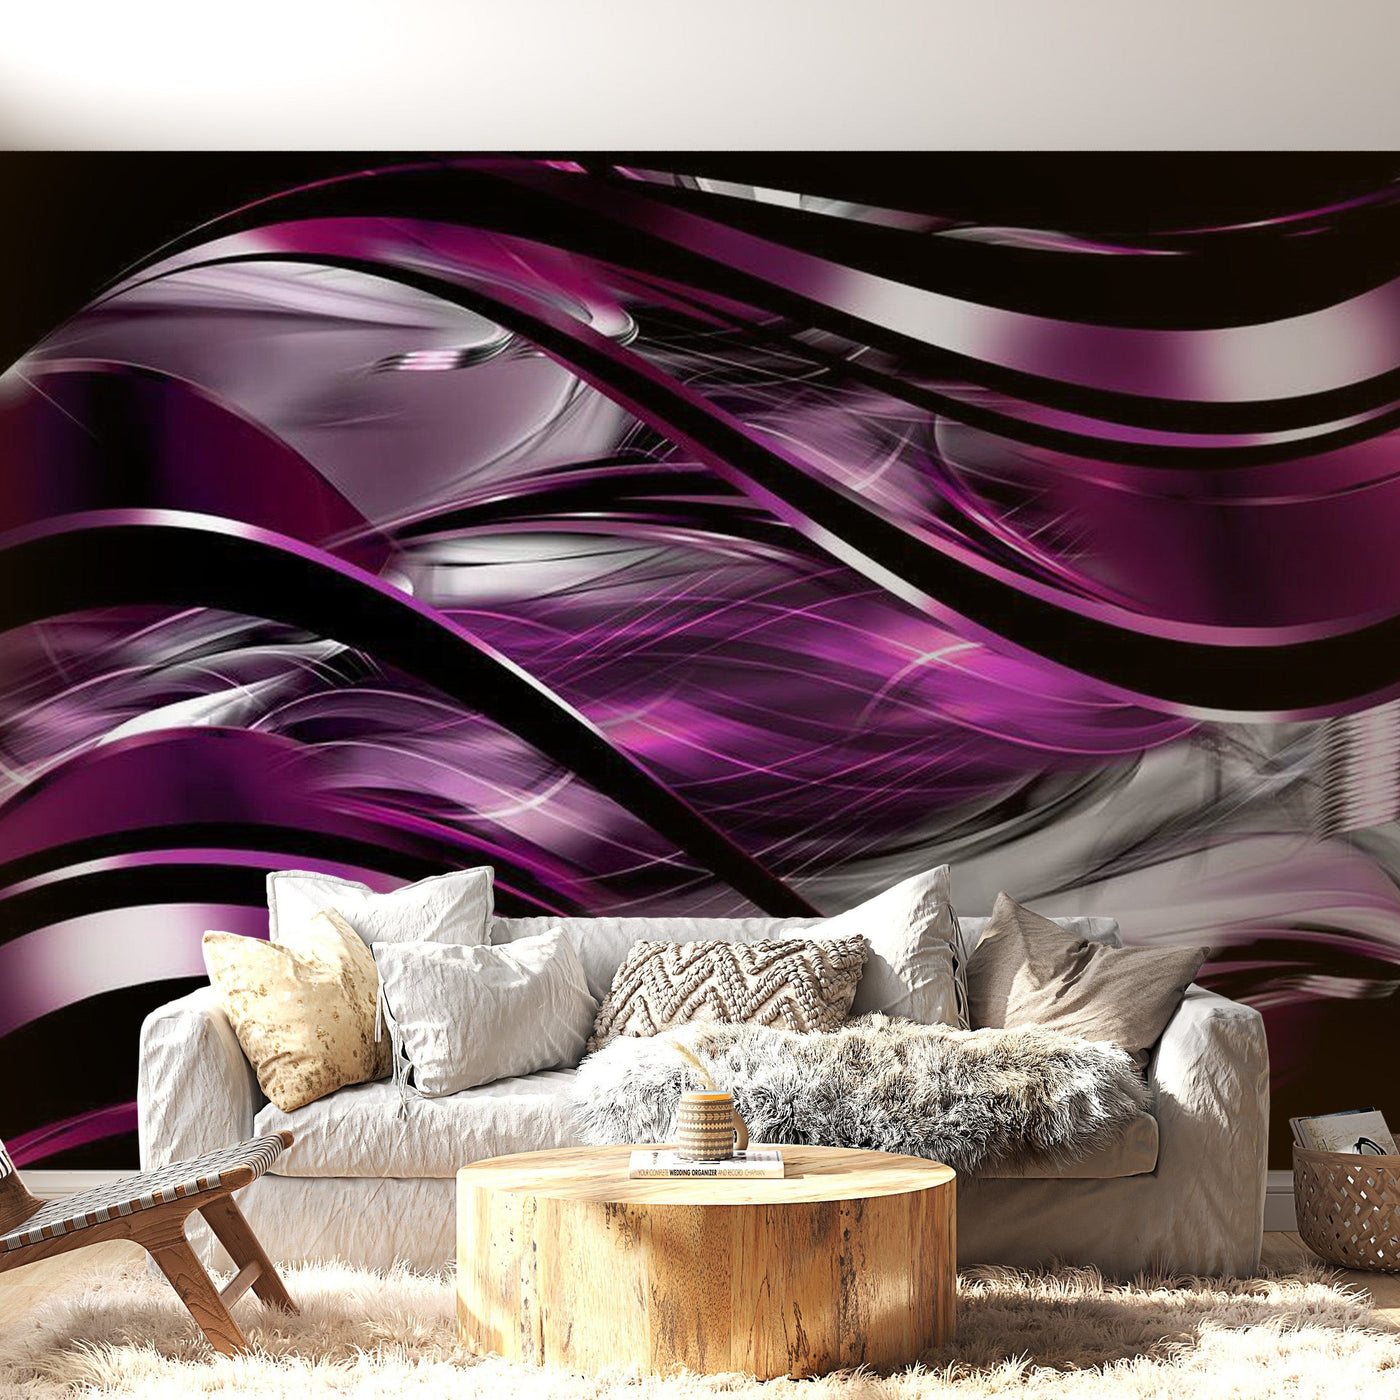 Peel & Stick Glam Wall Mural - Blueberry Dream - Removable Wall Decals